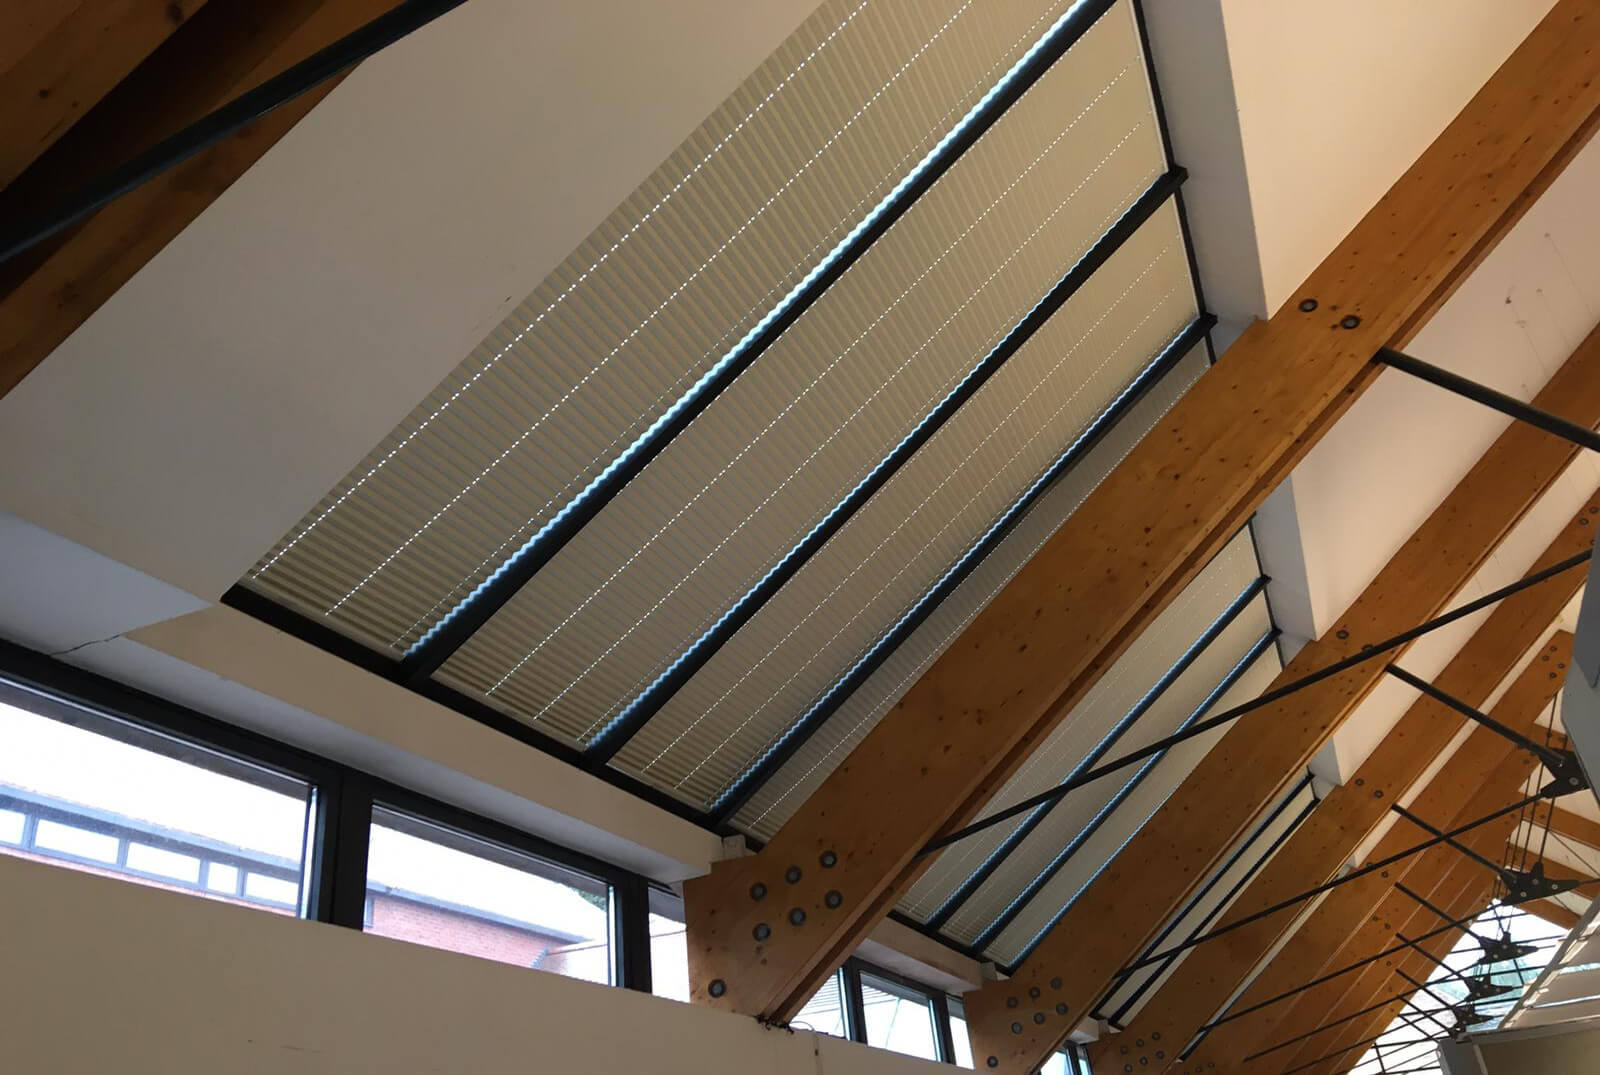 Suppliers of Commercial Blinds For Schools UK